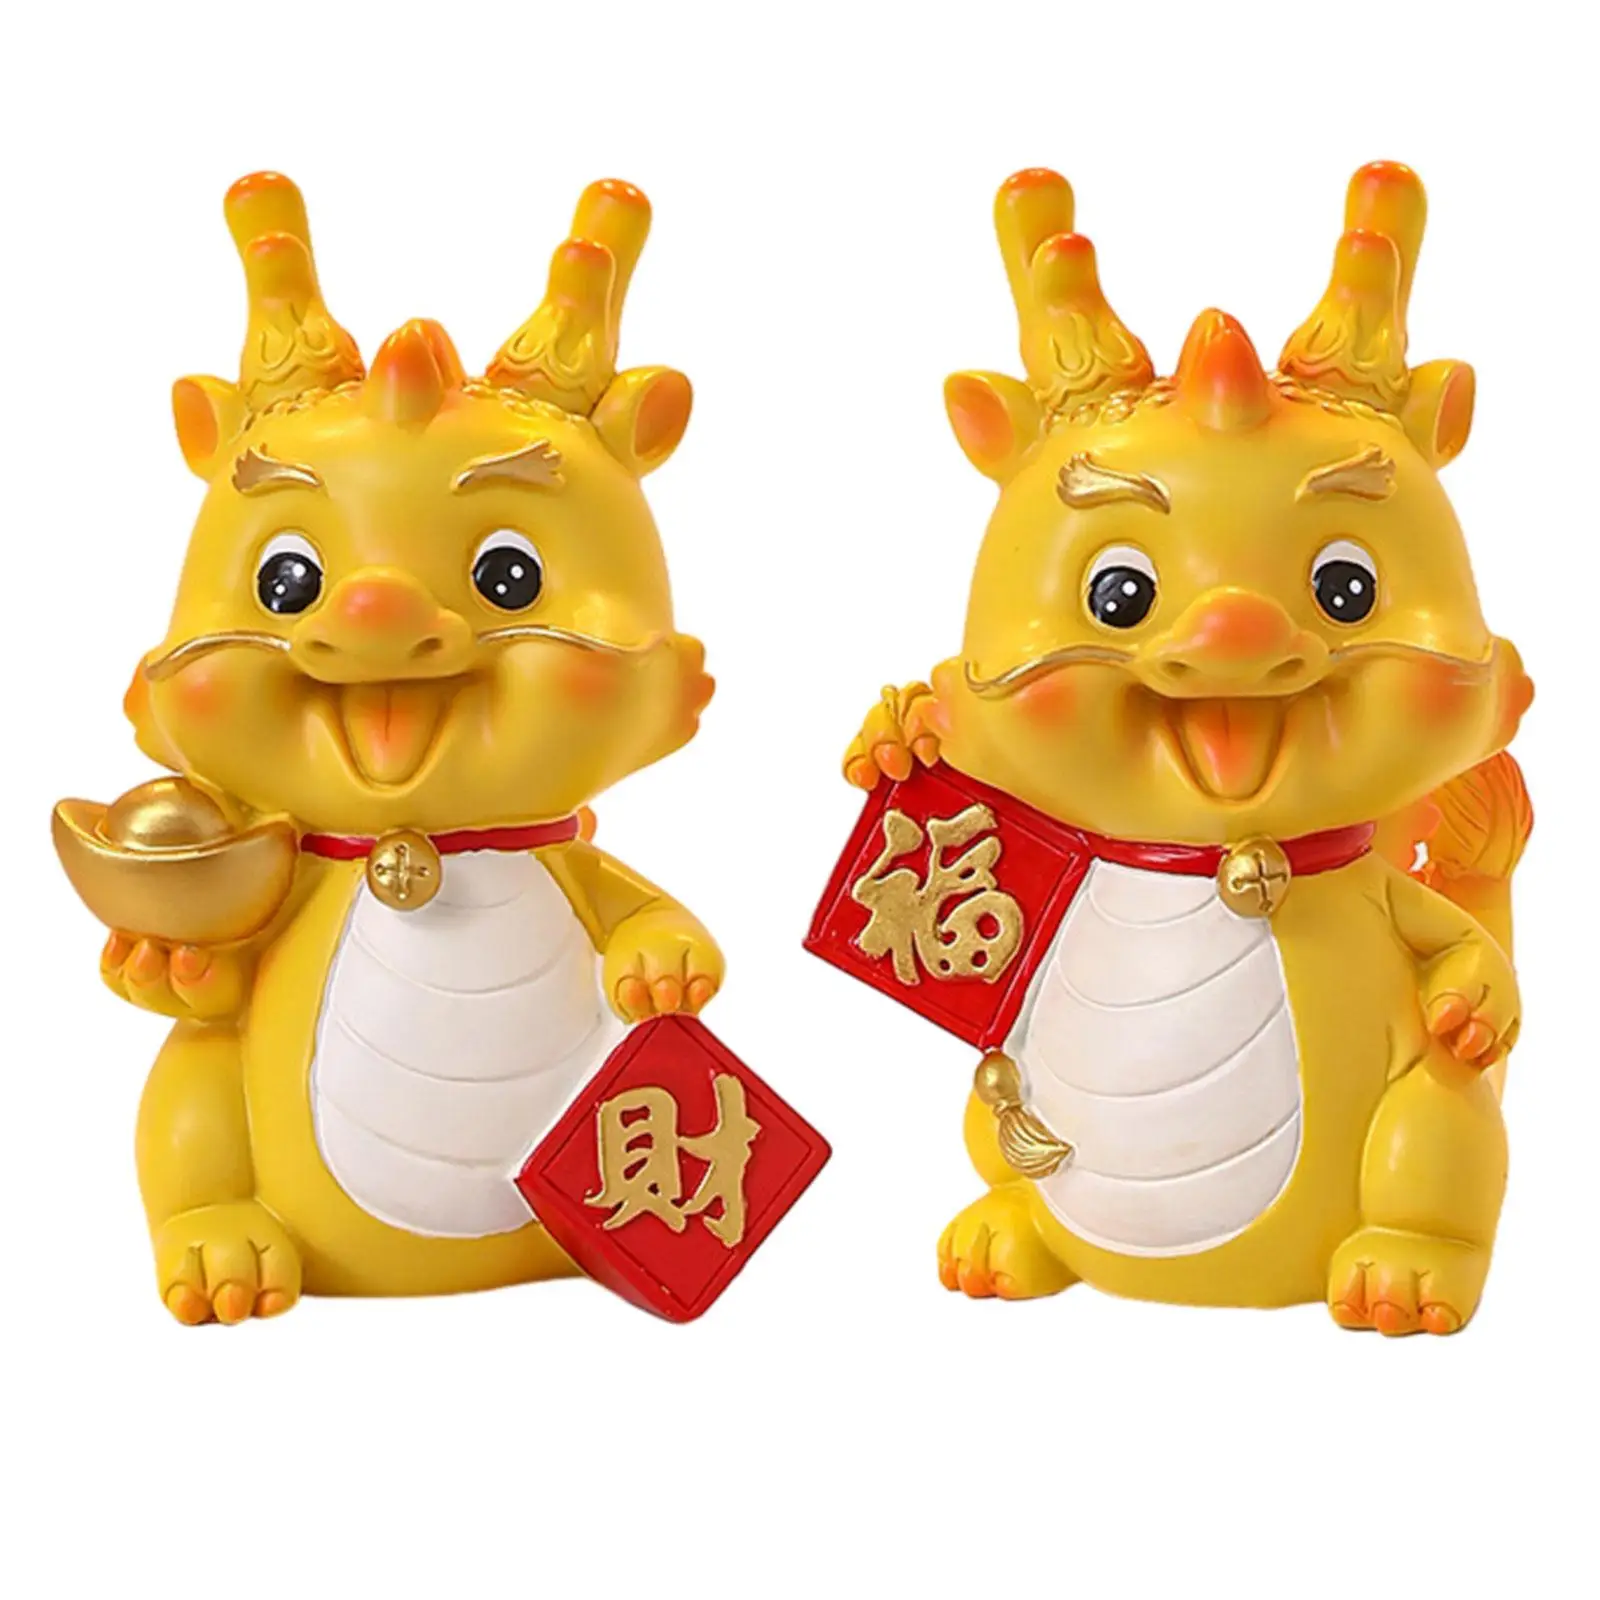 Dragon Statue Money Bank Sculpture for Apartment Restaurant New Year Gifts